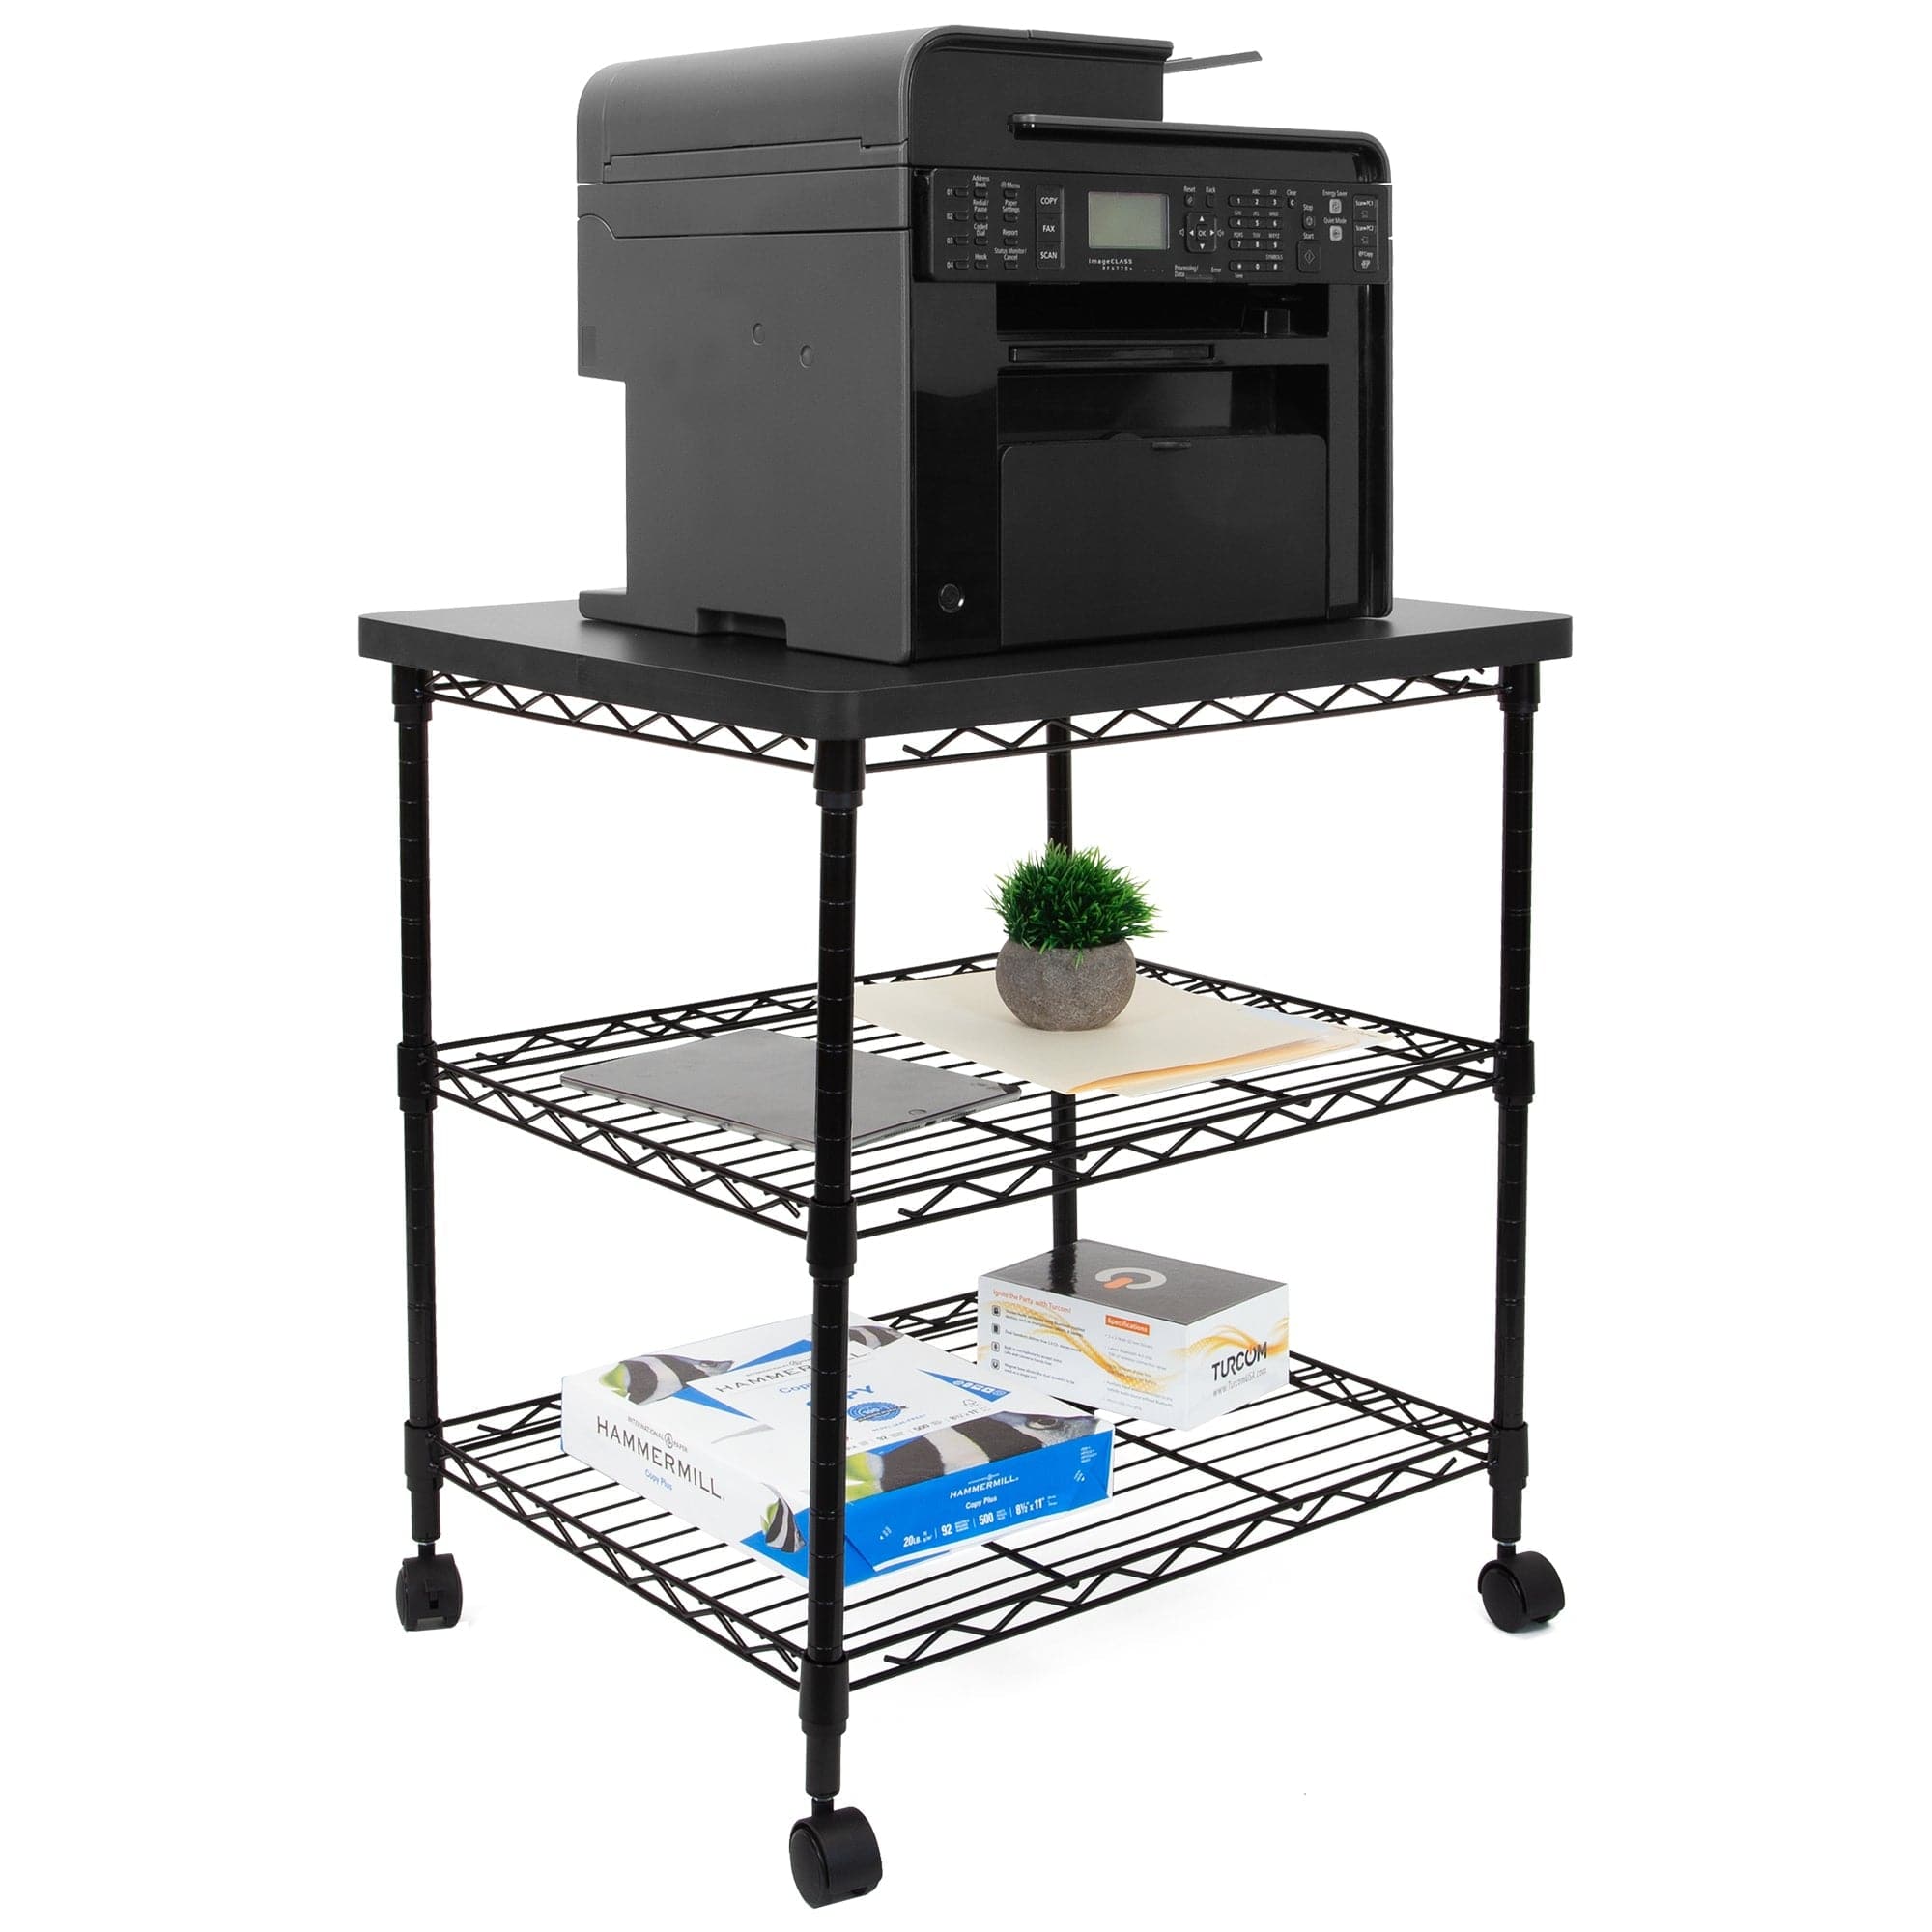 Three-Tier Large Printer Cart with Wheels - Mount-It!